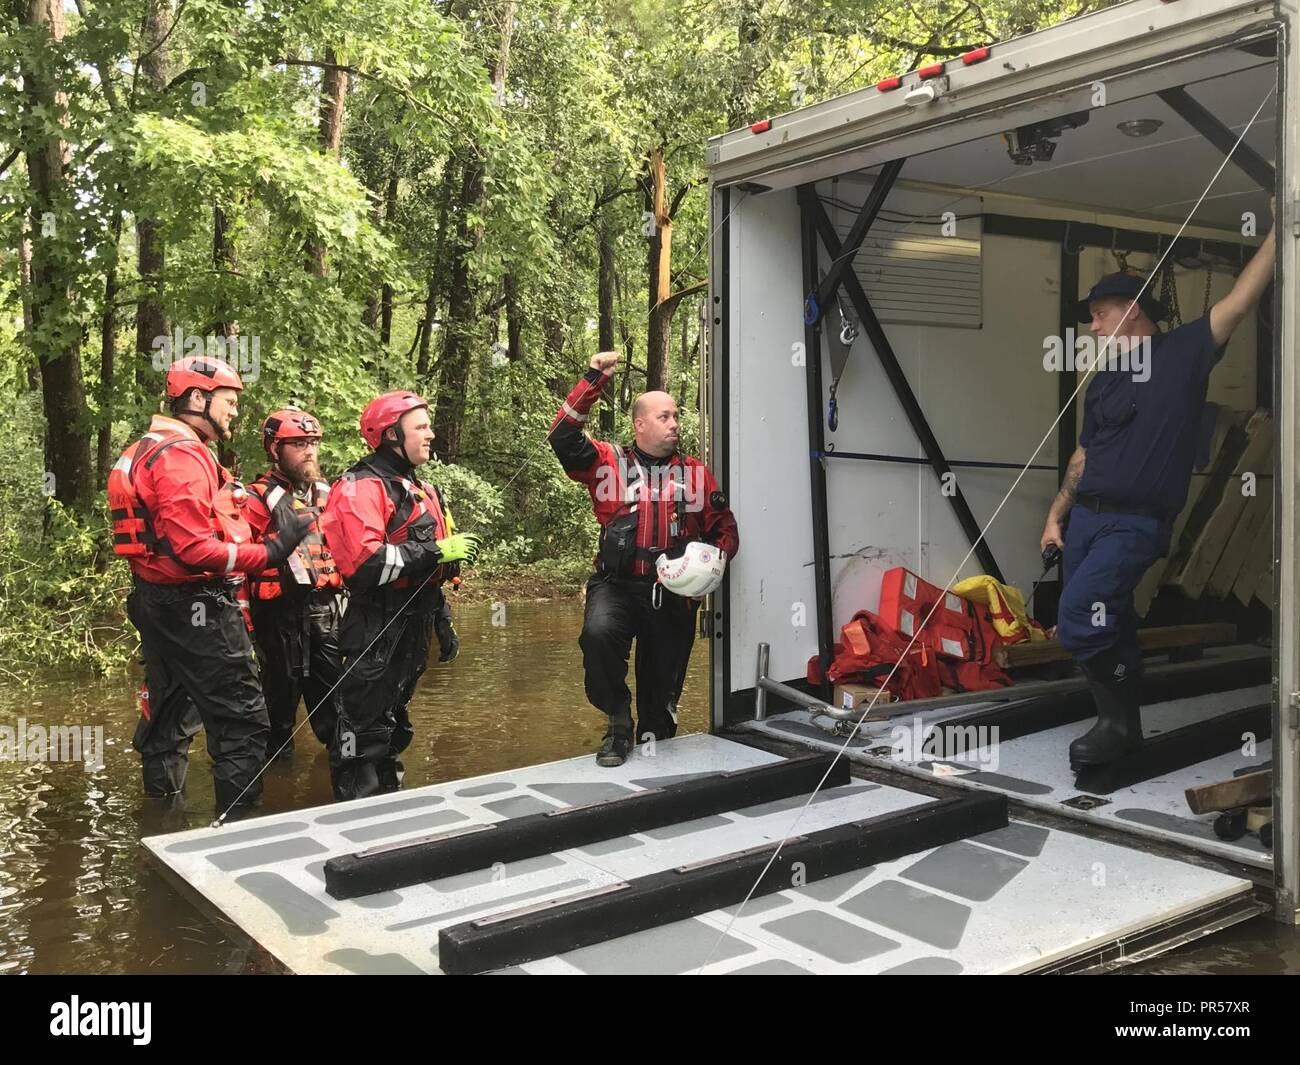 Coast Guard works with partner agencies in Lumberton, N.C.    Chief Petty Officer John Mitchell, a shallow-water response boat team member, coordinates rescue efforts with the New Cumberland County River Rescue team from New Cumberland, Pennsylvania, in the Mayfair neighborhood of Lumberton, North Carolina, Sept. 17, 2018.    Shallow-water response teams use 16-foot aluminum boats in order to navigate areas flooded by Hurricane Florence and to provide assistance in coordination with state and local emergency operation centers.    U.S. Coast Guard Stock Photo